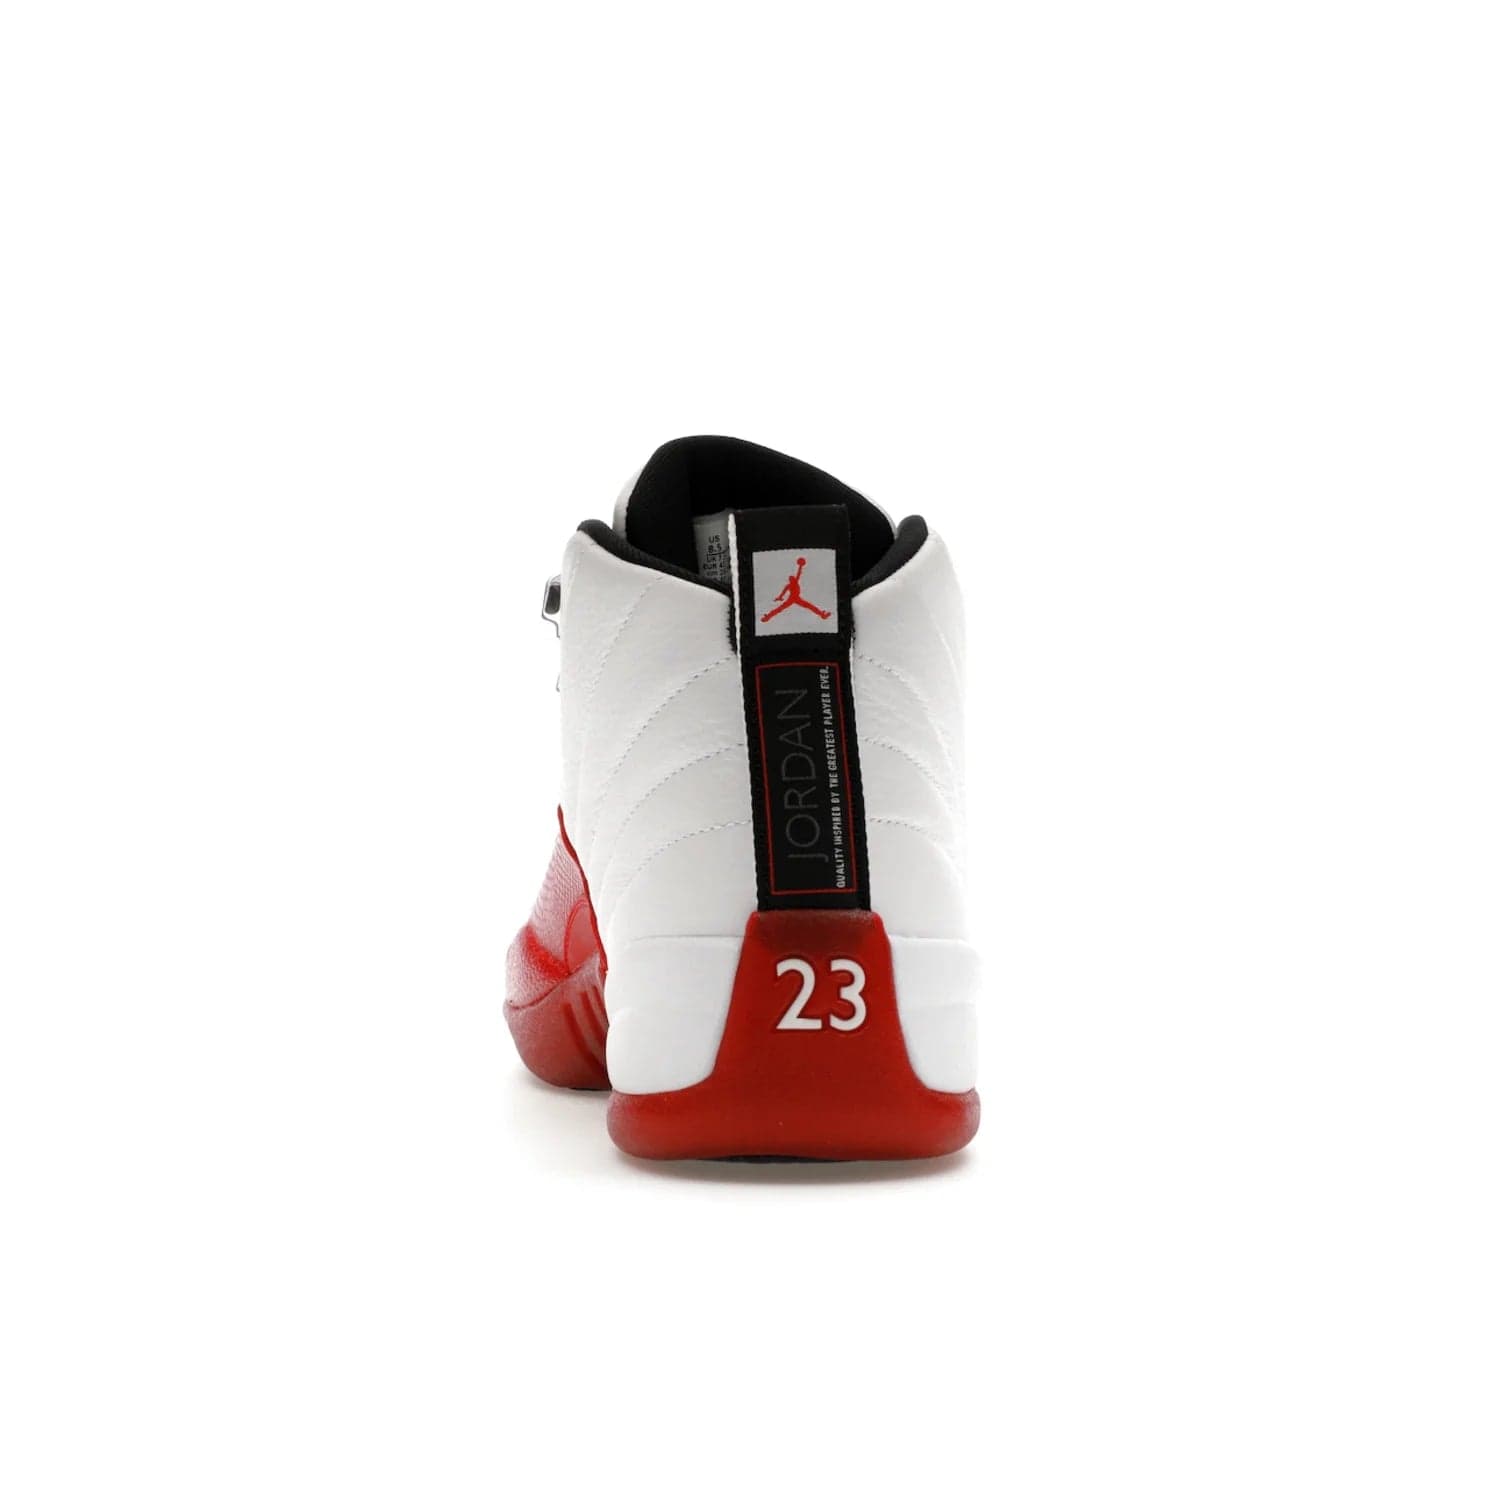 Jordan 12 Retro Cherry (2023) - Image 27 - Only at www.BallersClubKickz.com - Live your sneaker legend with the Jordan 12 Retro Cherry. Iconic pebbled leather mudguards, quilted uppers, and varsity red accents make this 1997 classic a must-have for 2023. Shine on with silver hardware and matching midsoles, and bring it all together for limited-edition style on October 28th. Step into Jordan legacy with the Retro Cherry.